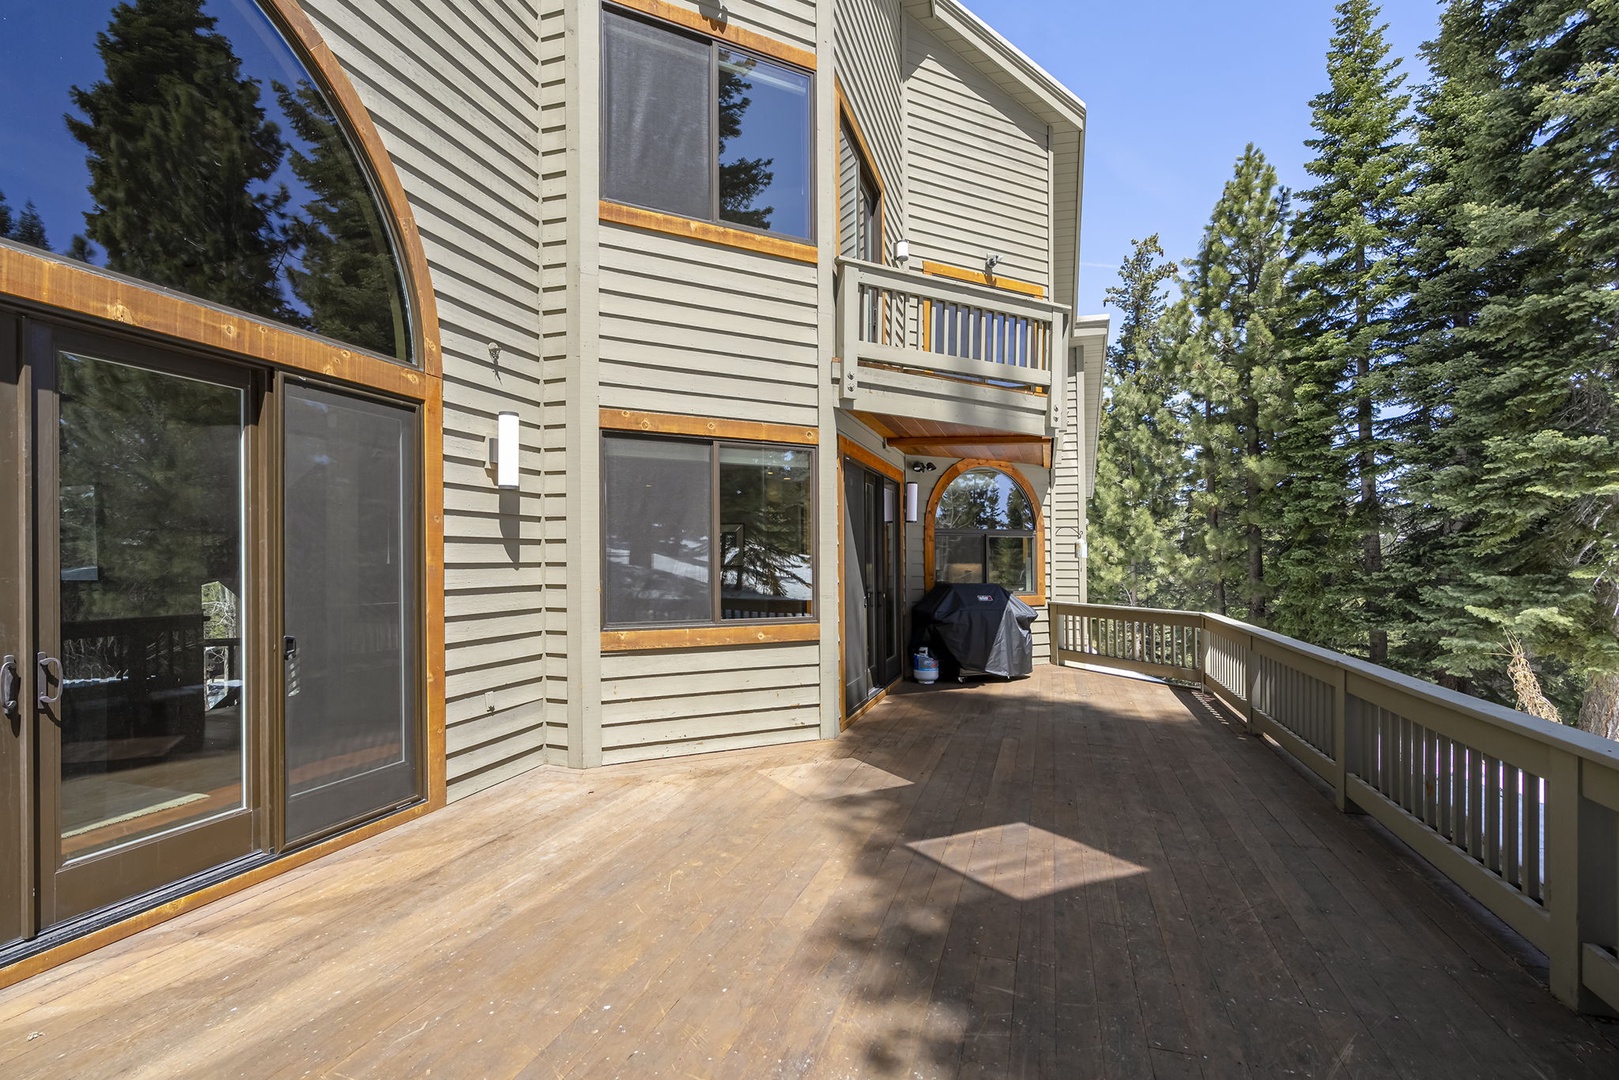 Private patio: Hilltop Manor in Tahoe Donner